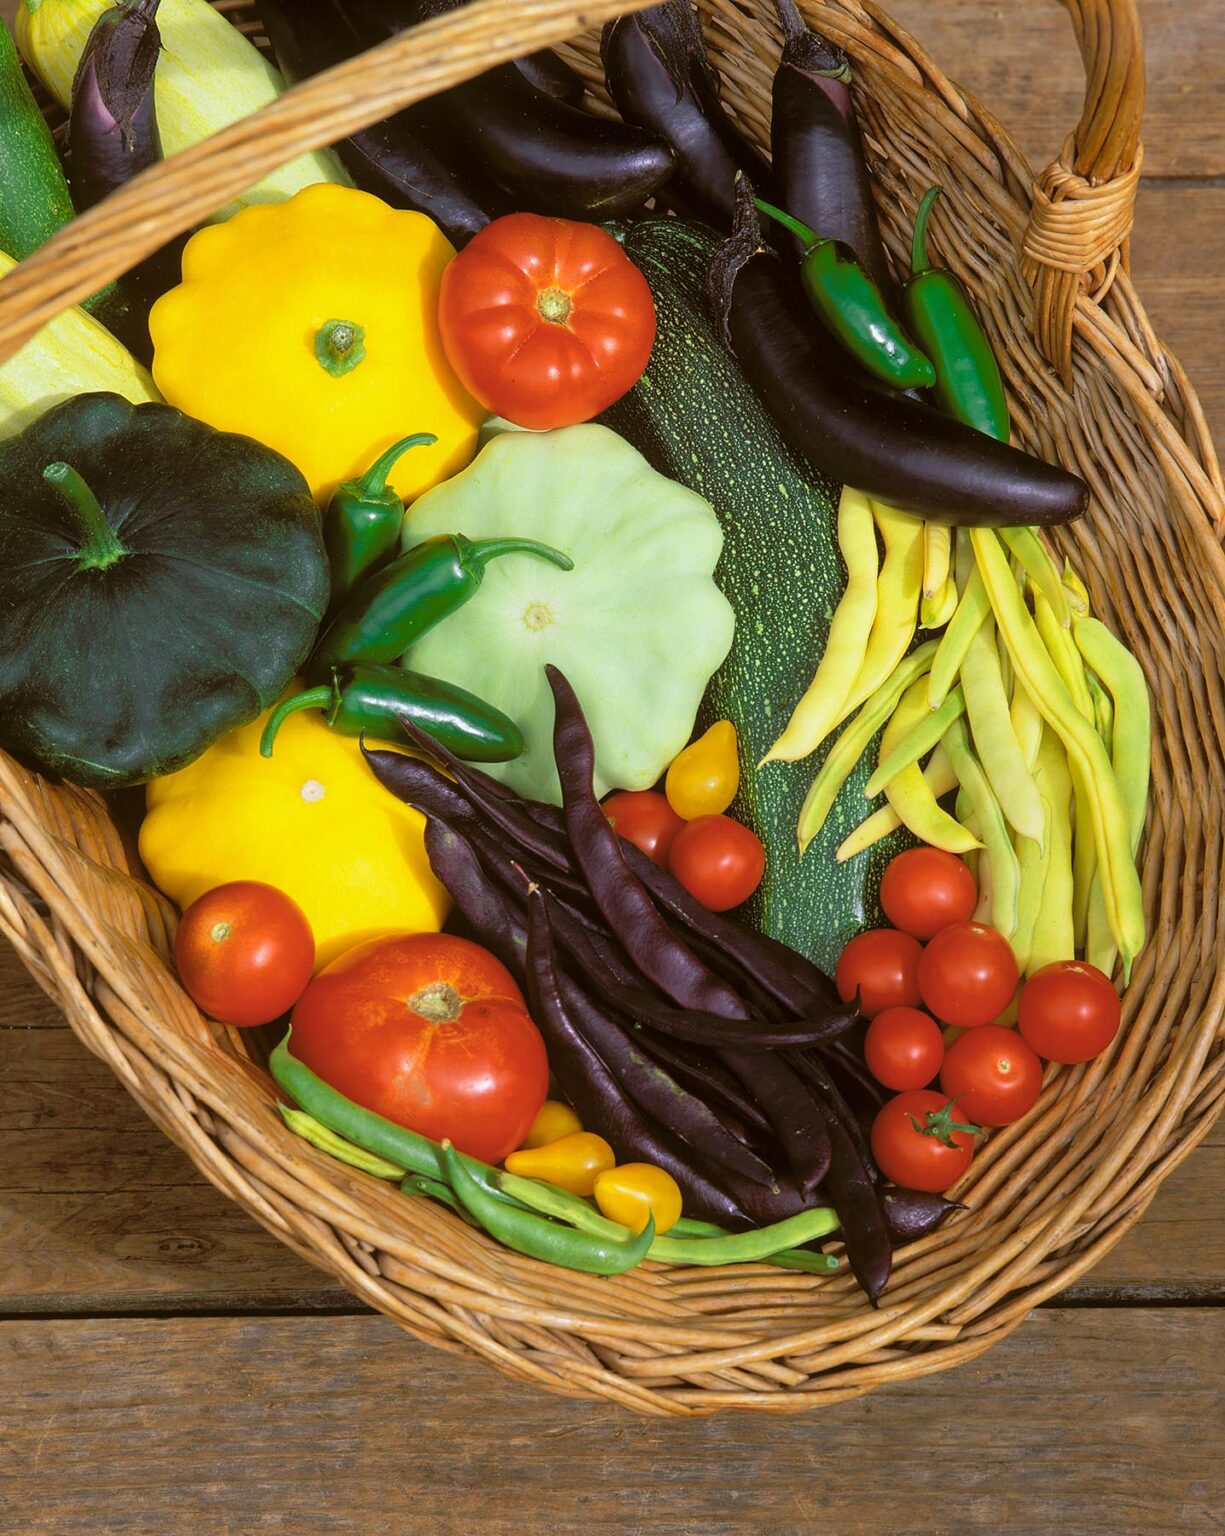 A basket of VEGETABLES - Tomatoes, yellow green Summer Squash, Zucchini, Egg Plant, Peppers, green, yellow and purple Beans